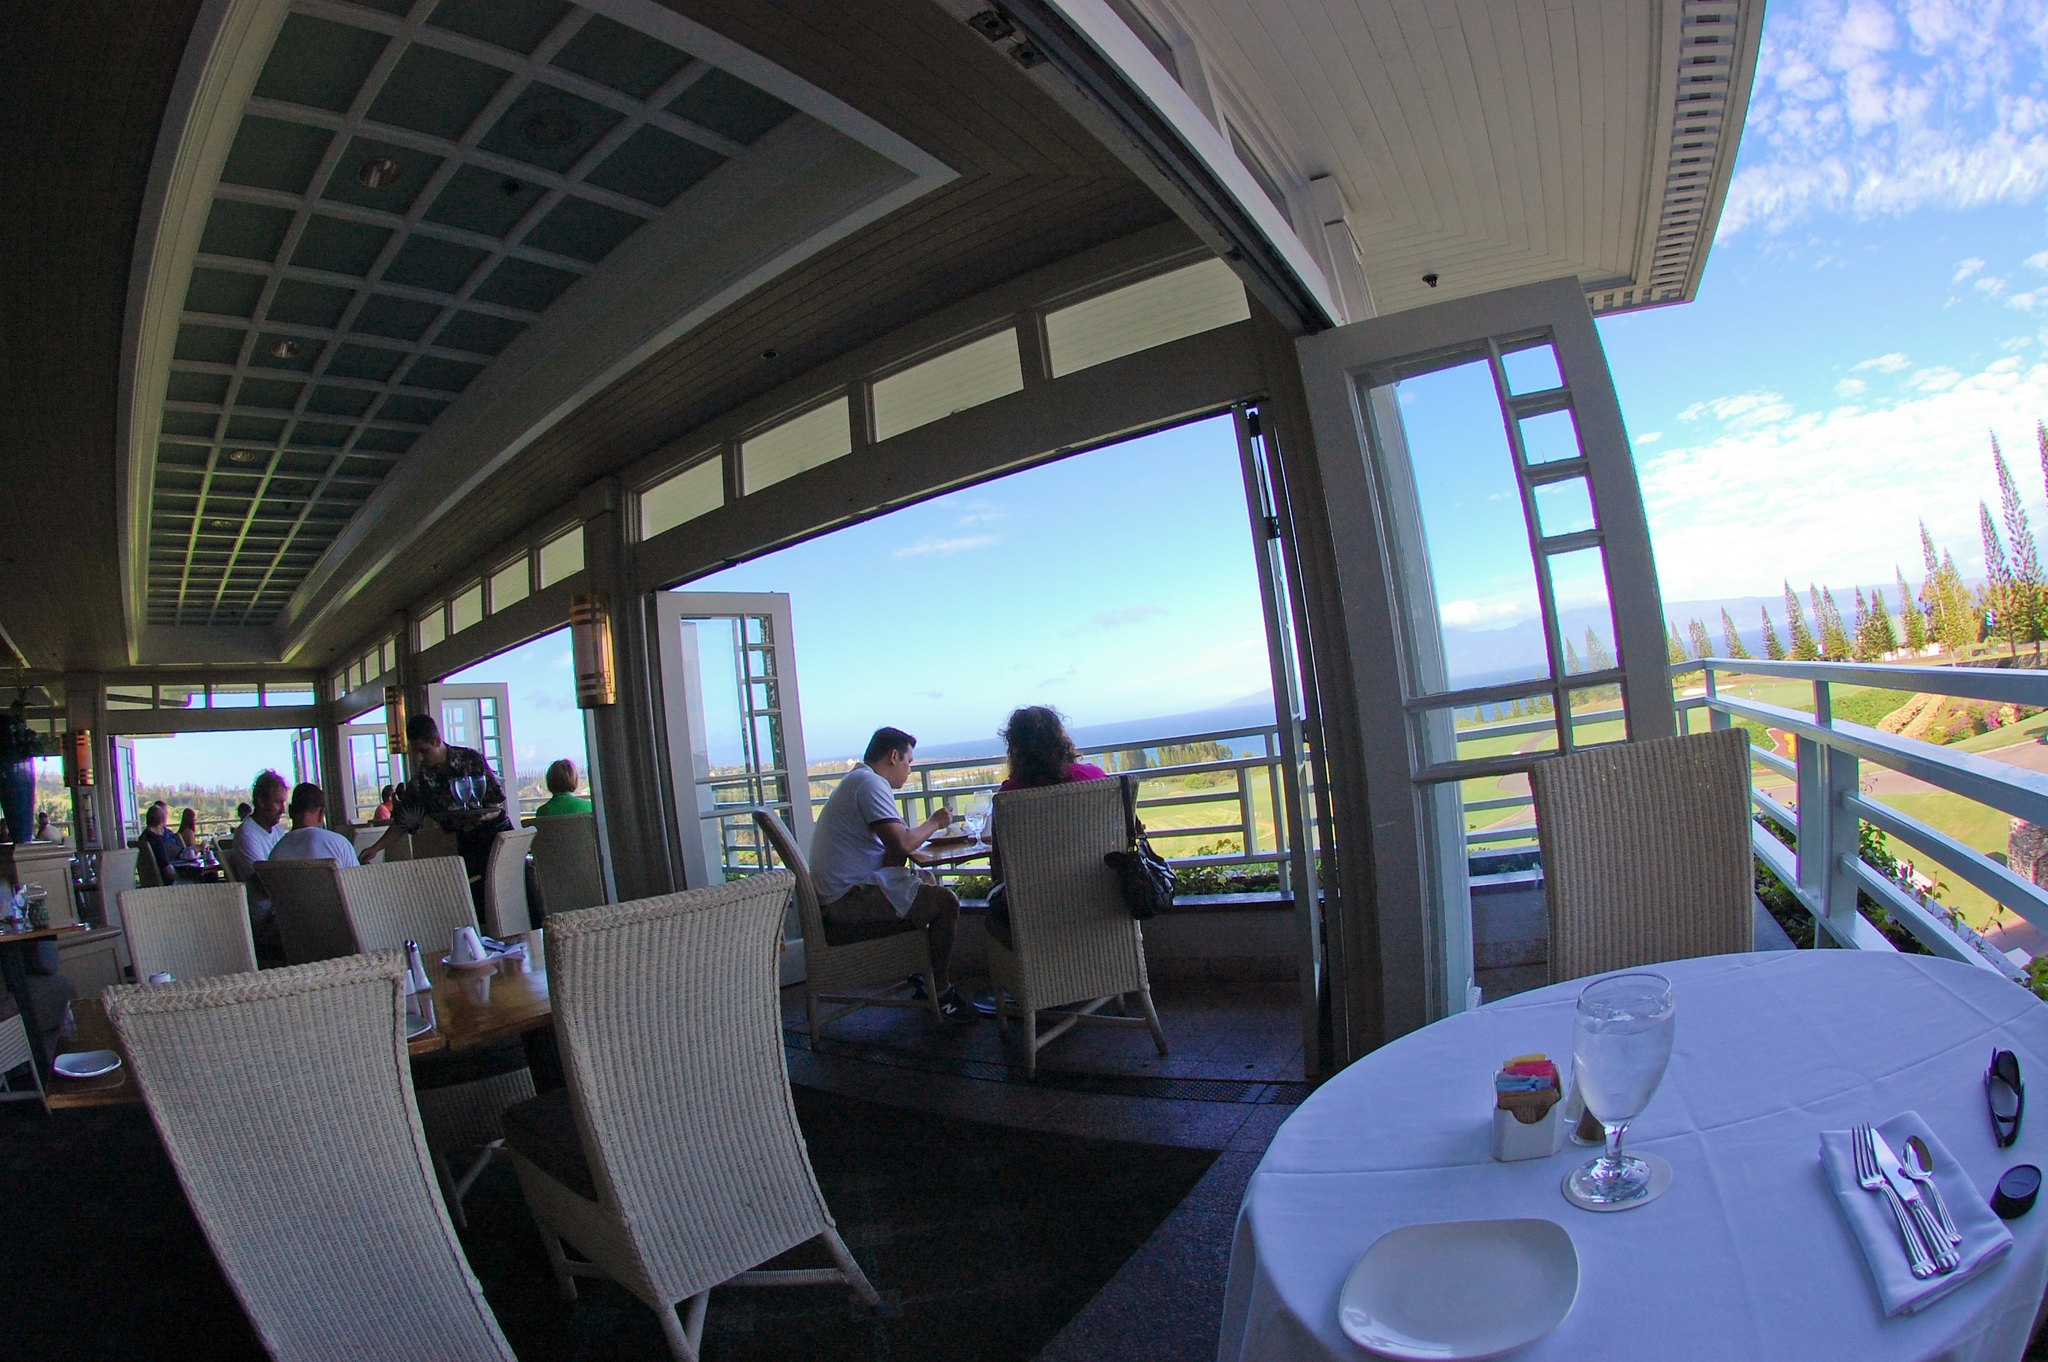 Fish-eye view inside The Plantation House, labeled as one of the best restaurants in Maui, Hawaii, where diners enjoy their meals and a crew serving drinks with a vast landscape in background